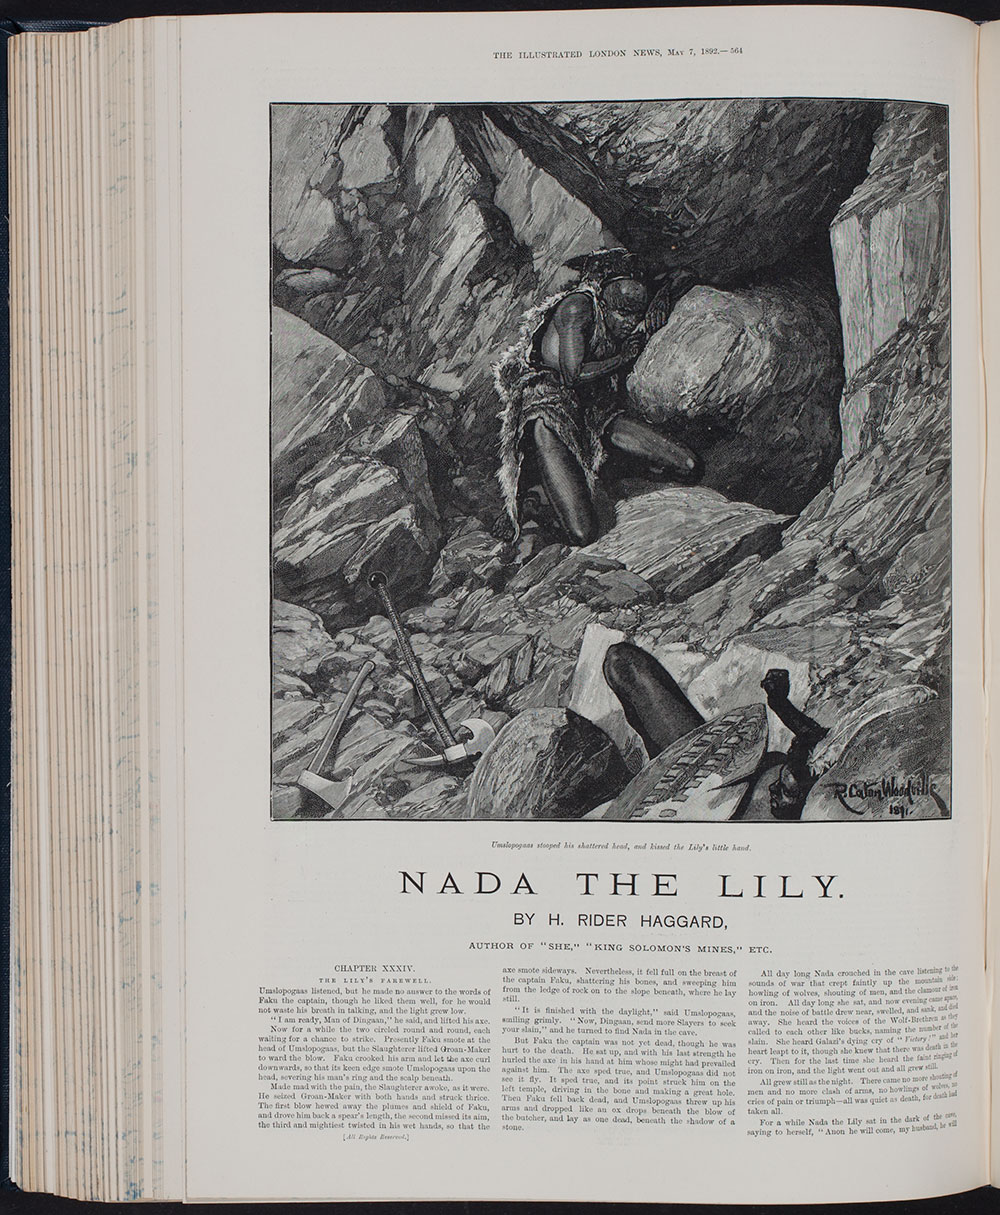 H. Rider Haggard. Nada the Lily. In The Illustrated London News, Vol. 100 (1892).